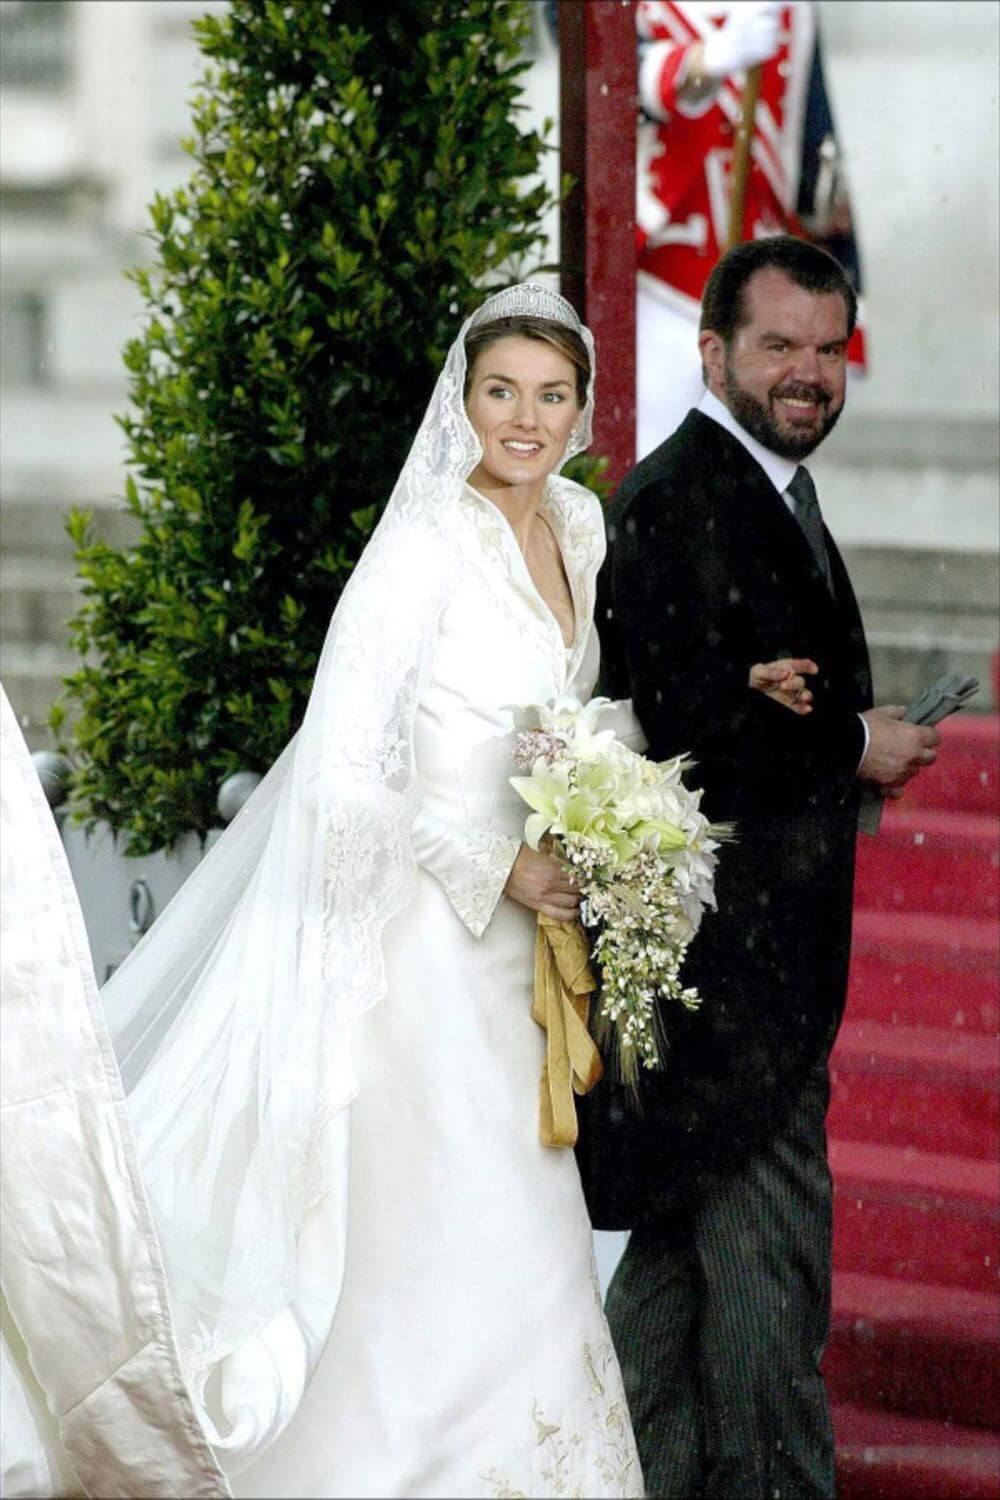 Queen Letizia walking down the aisle in a magnificent wedding gown